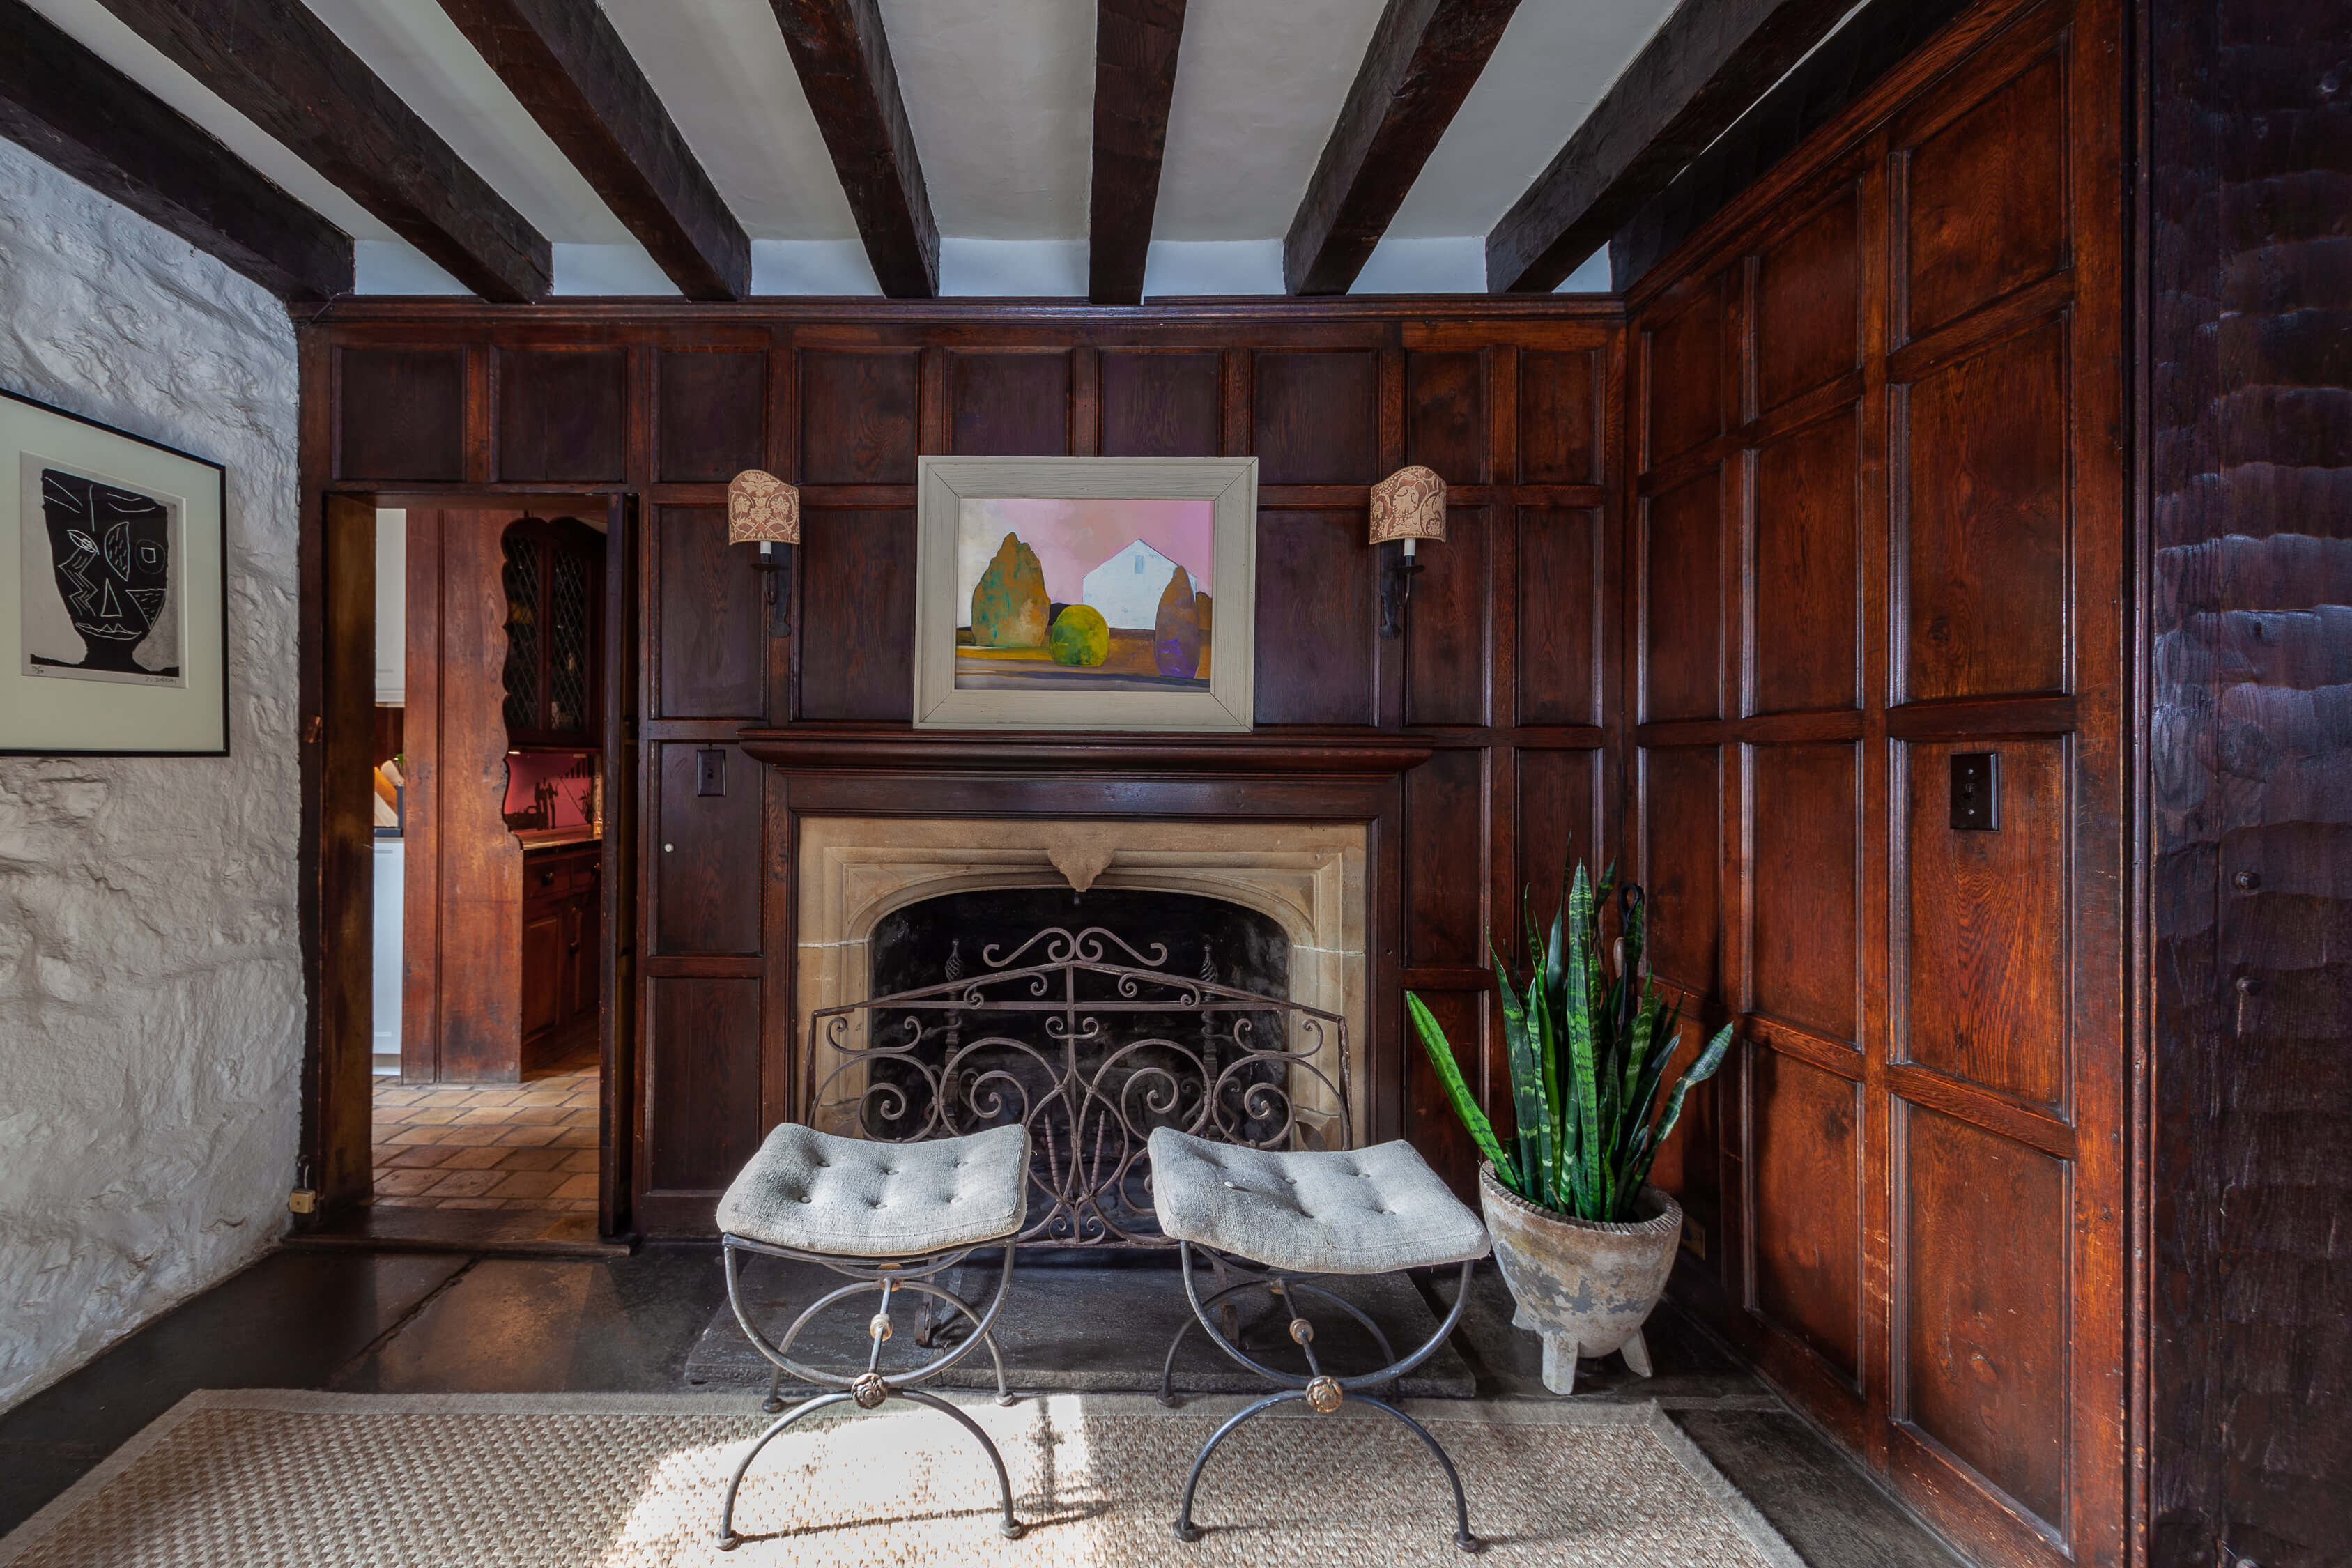 interior of lewis bowman house in bronxville ny